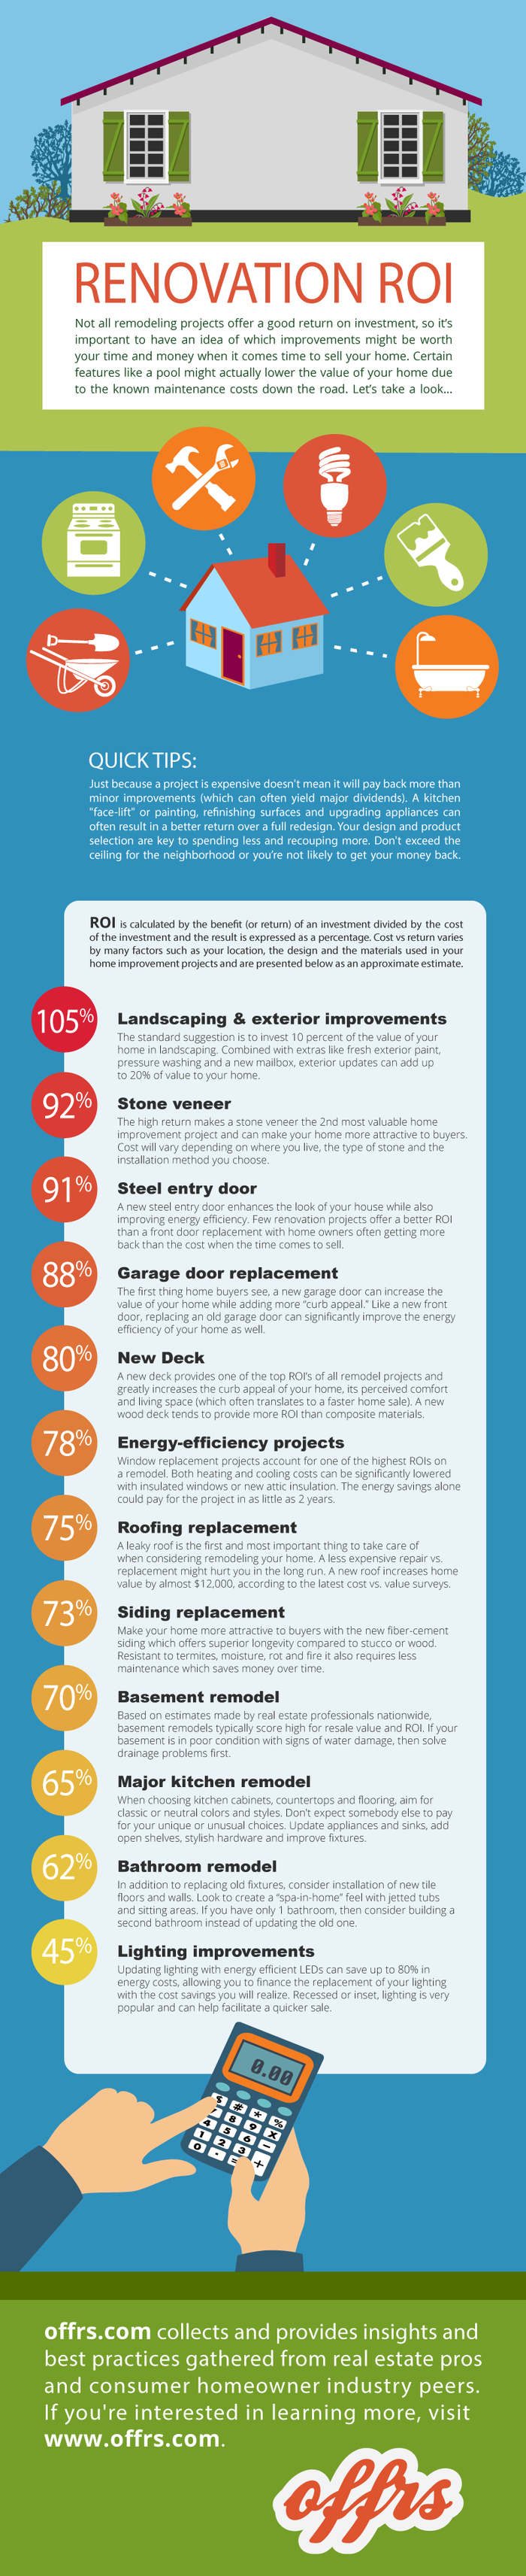 offrs reviews agent feedback on home renovation ROI (a list of the most important projects)!